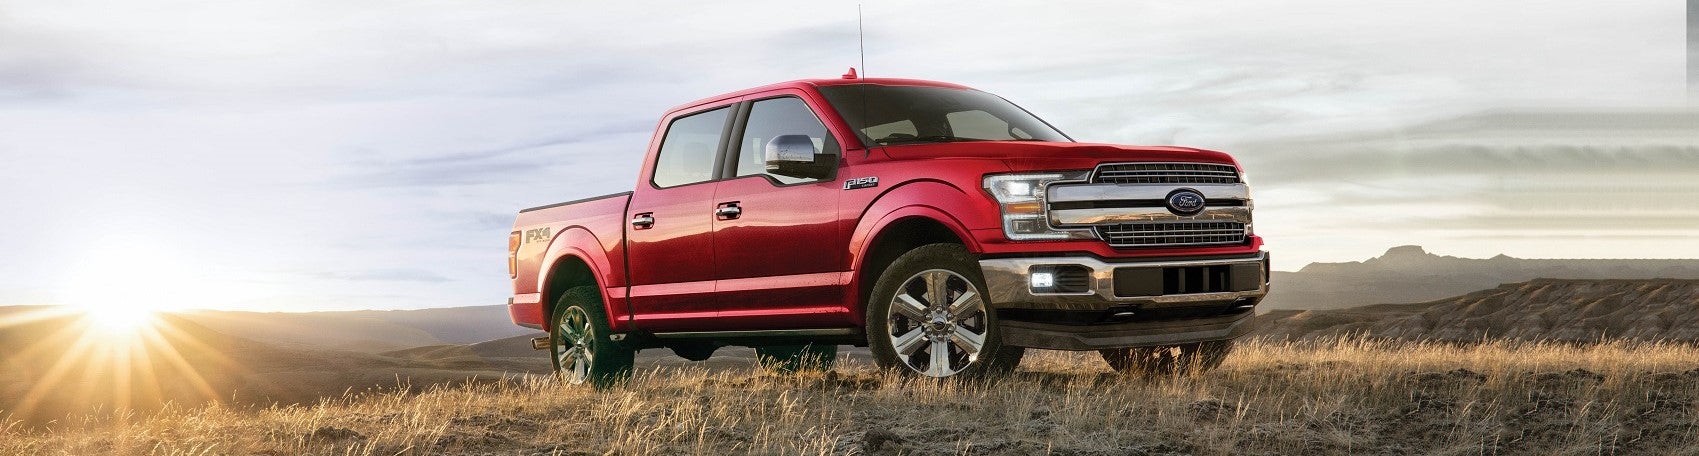 2020 Ford F-150 Lariat Ruby Red